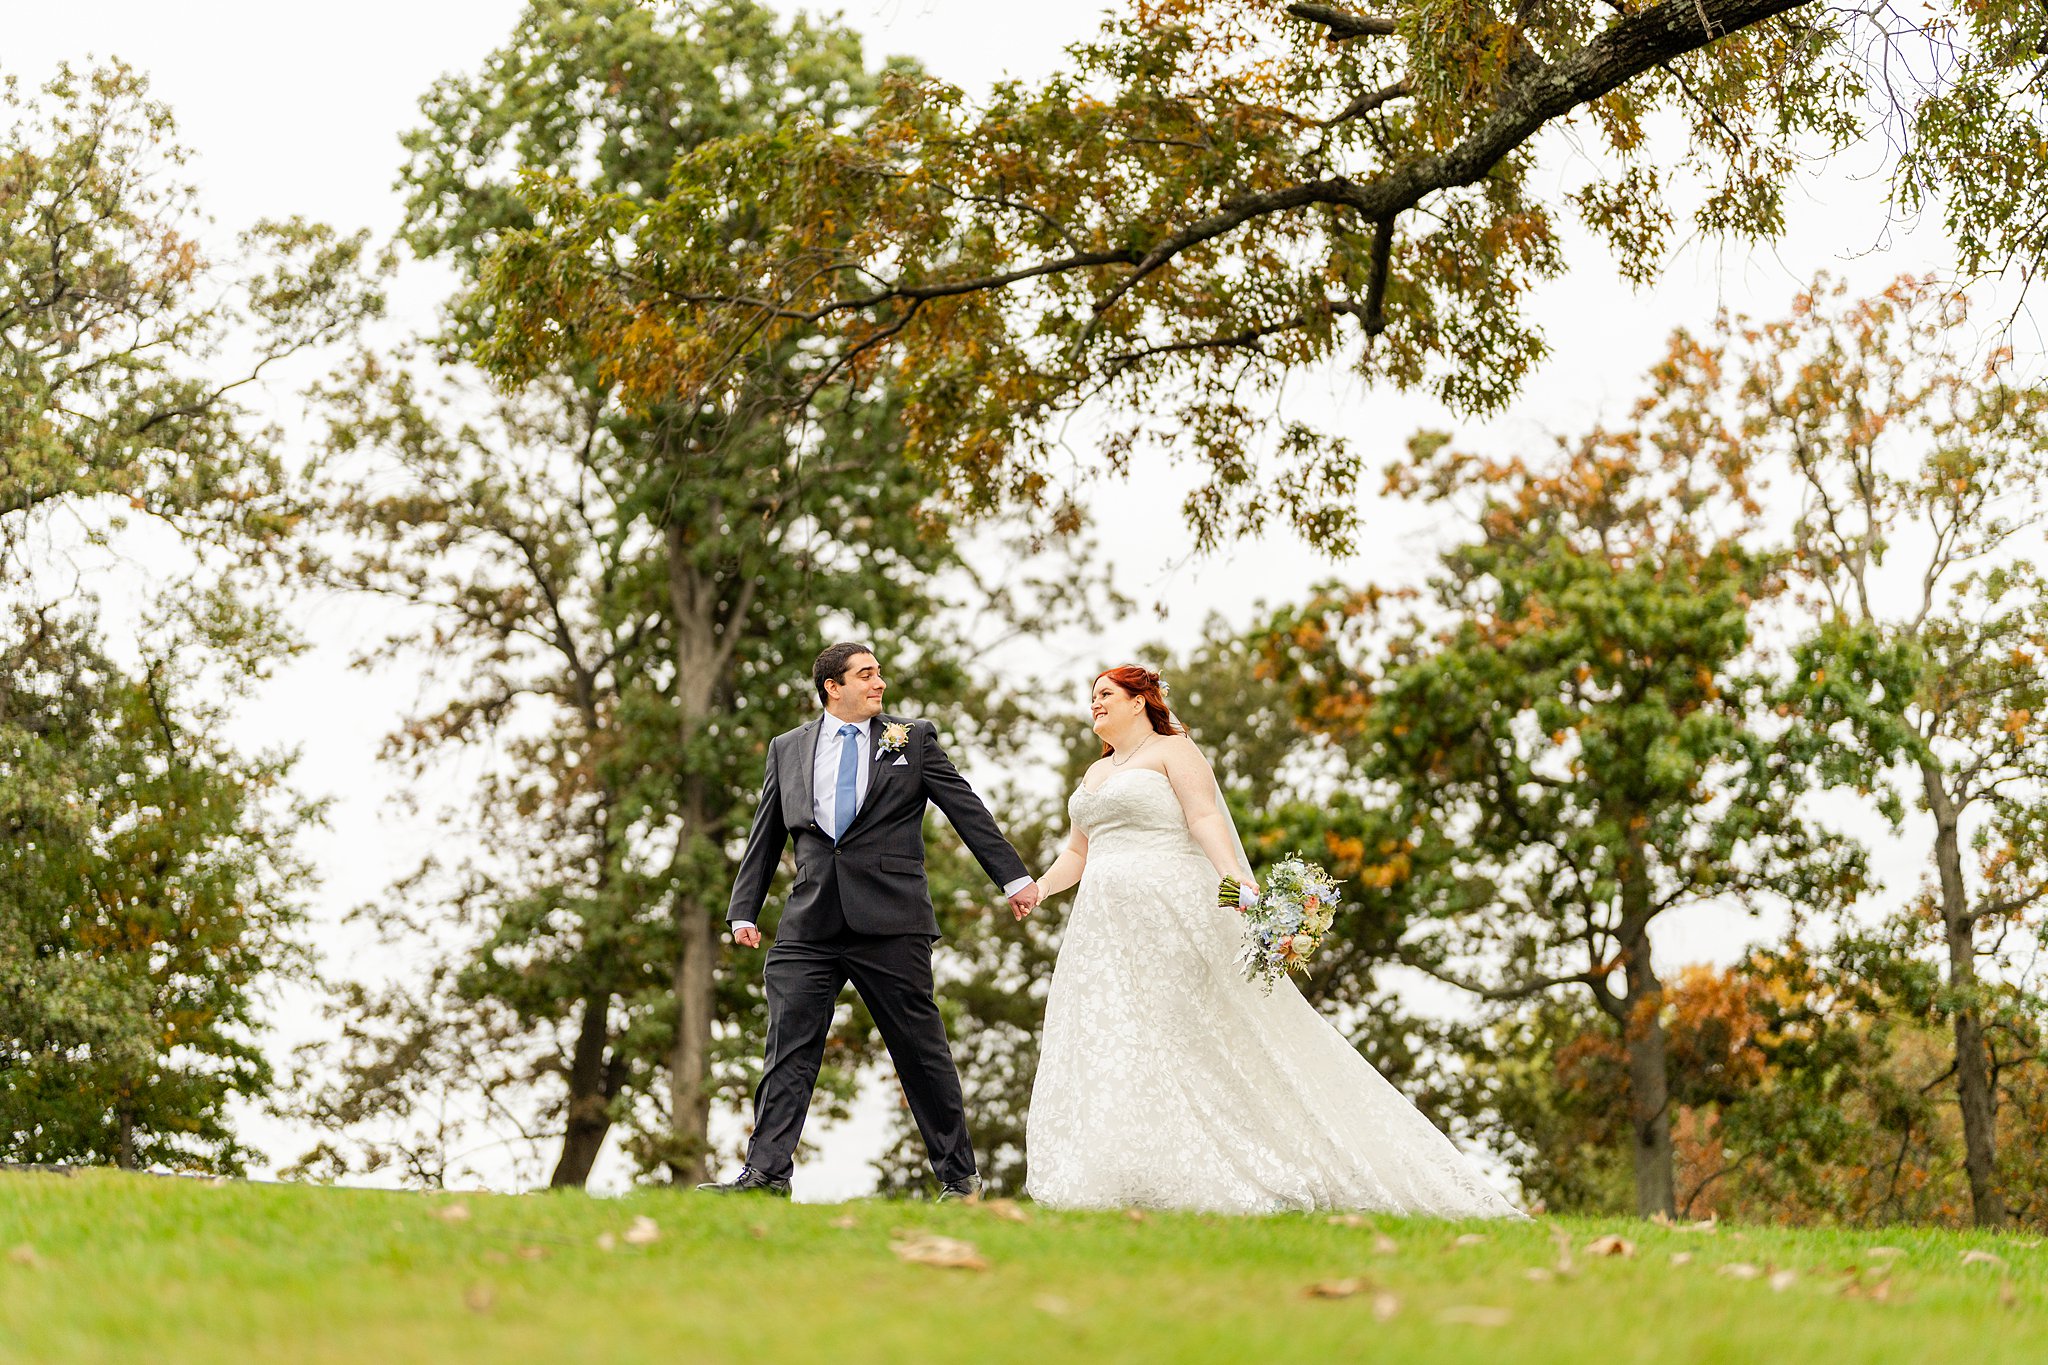 Newlyweds hold hands while walking through a park with tall trees wedding venues in northern virginia